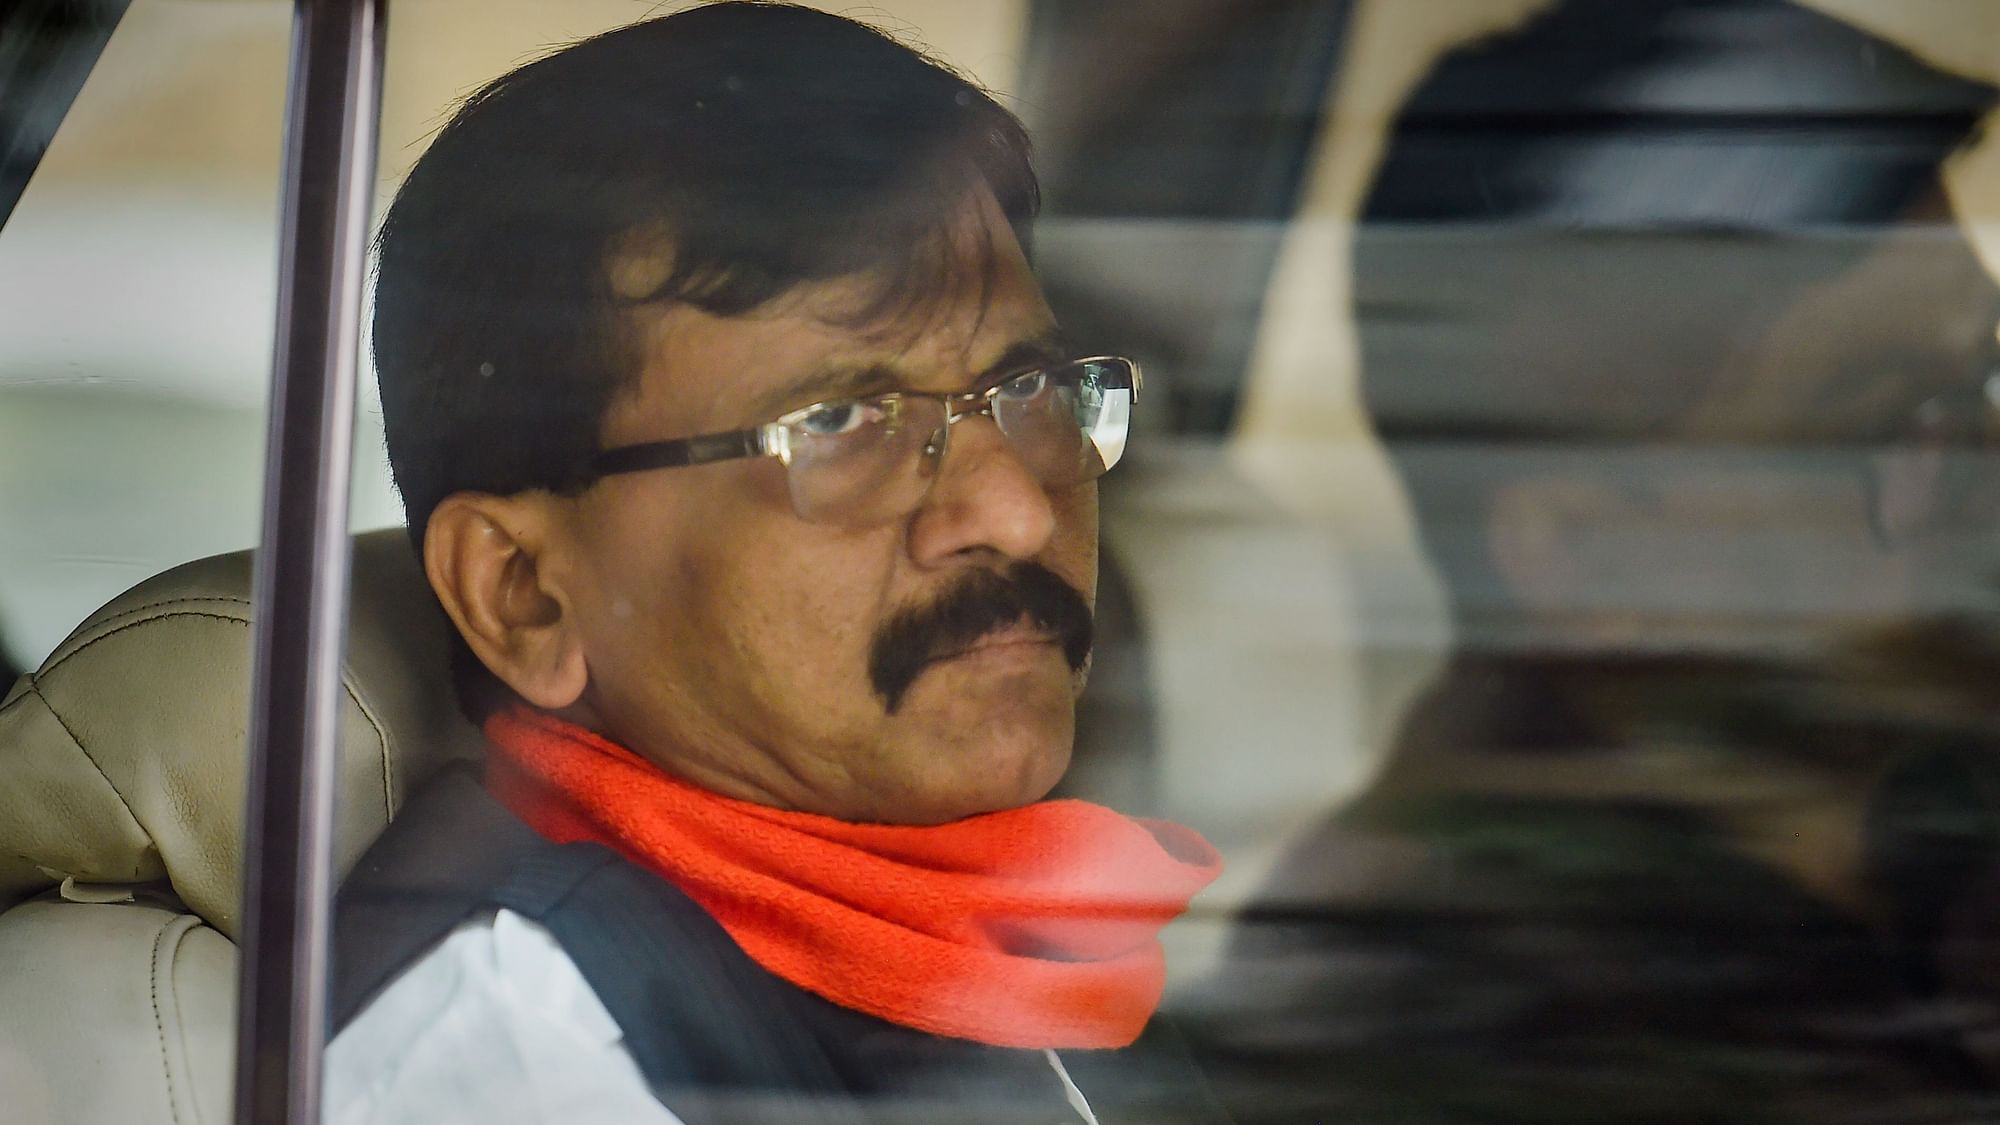 <div class="paragraphs"><p>In a fateful development exactly a month after the Eknath Shinde-BJP alliance ousted the Shiv Sena-led government in Maharashtra, Sena's most vocal leader, <a href="https://www.thequint.com/topic/sanjay-raut">Sanjay Raut</a>, was <a href="https://www.thequint.com/news/india/ed-shiv-senas-sanjay-raut-arrest-in-patra-chawl-case">arrested</a> by the Enforcement Directorate (ED) in a money laundering case at midnight on Monday, 1 August.</p></div>